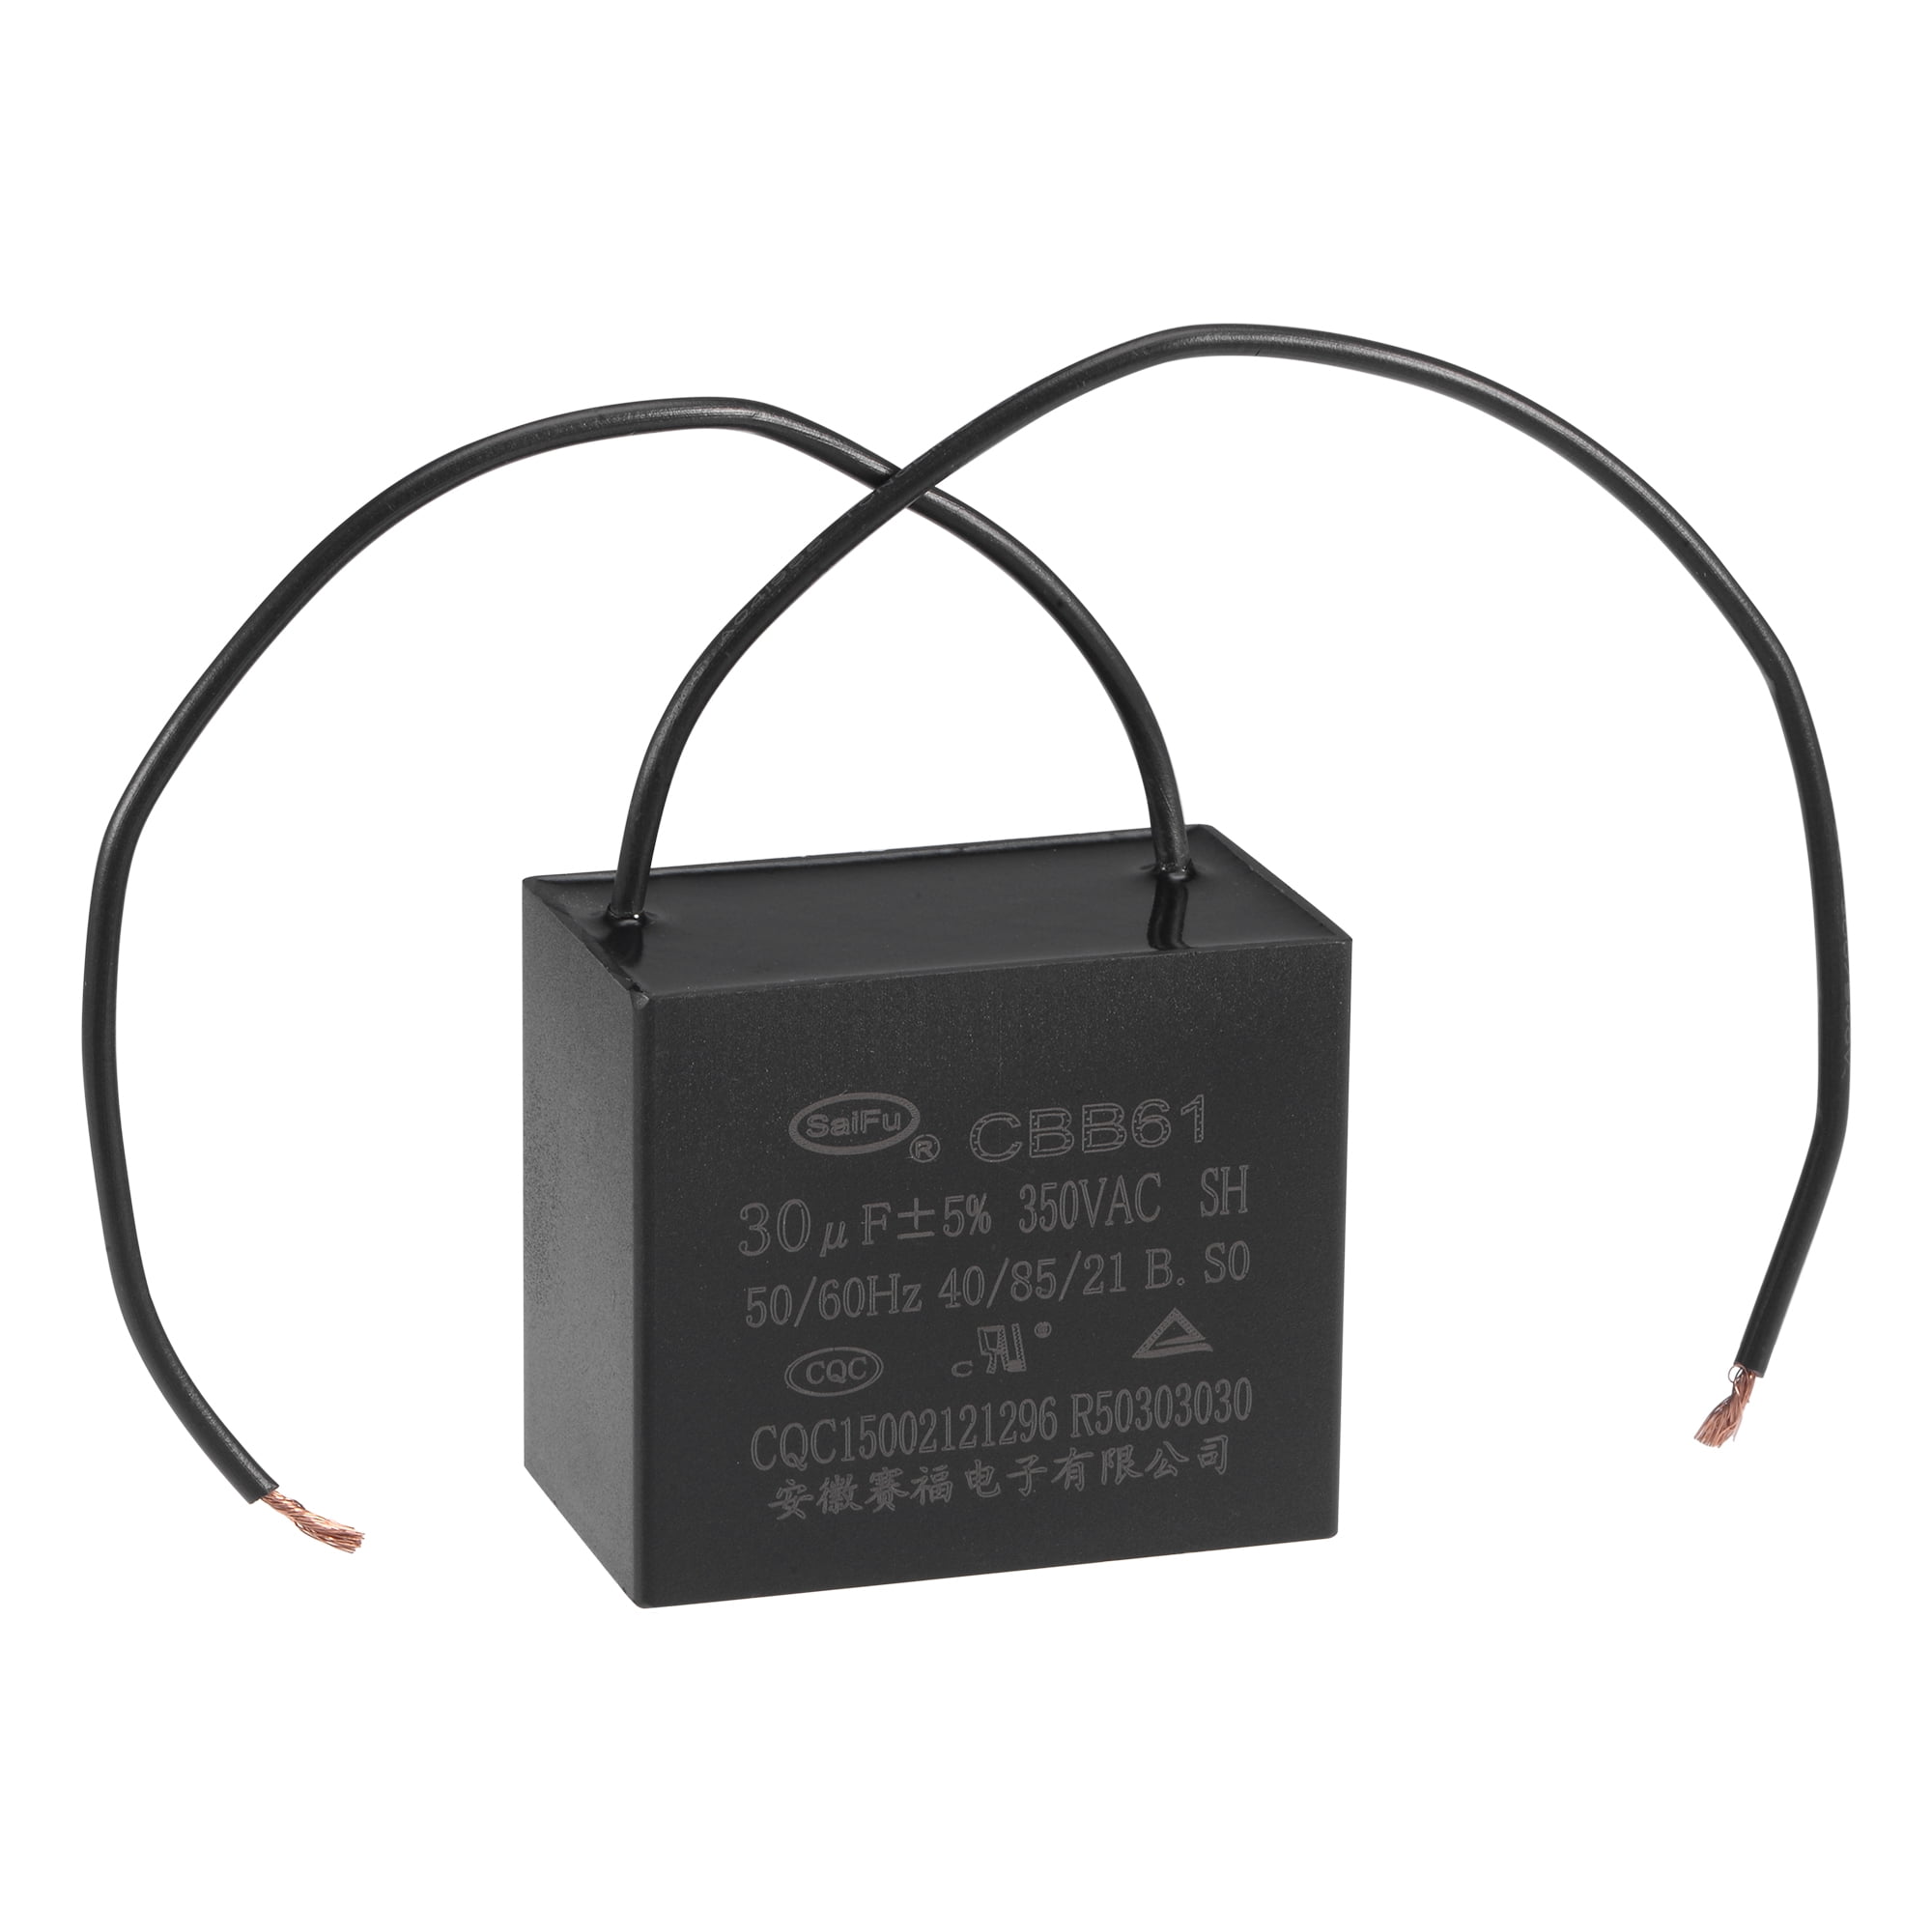 Wires Cbb61 Ceiling Fan Capacitor